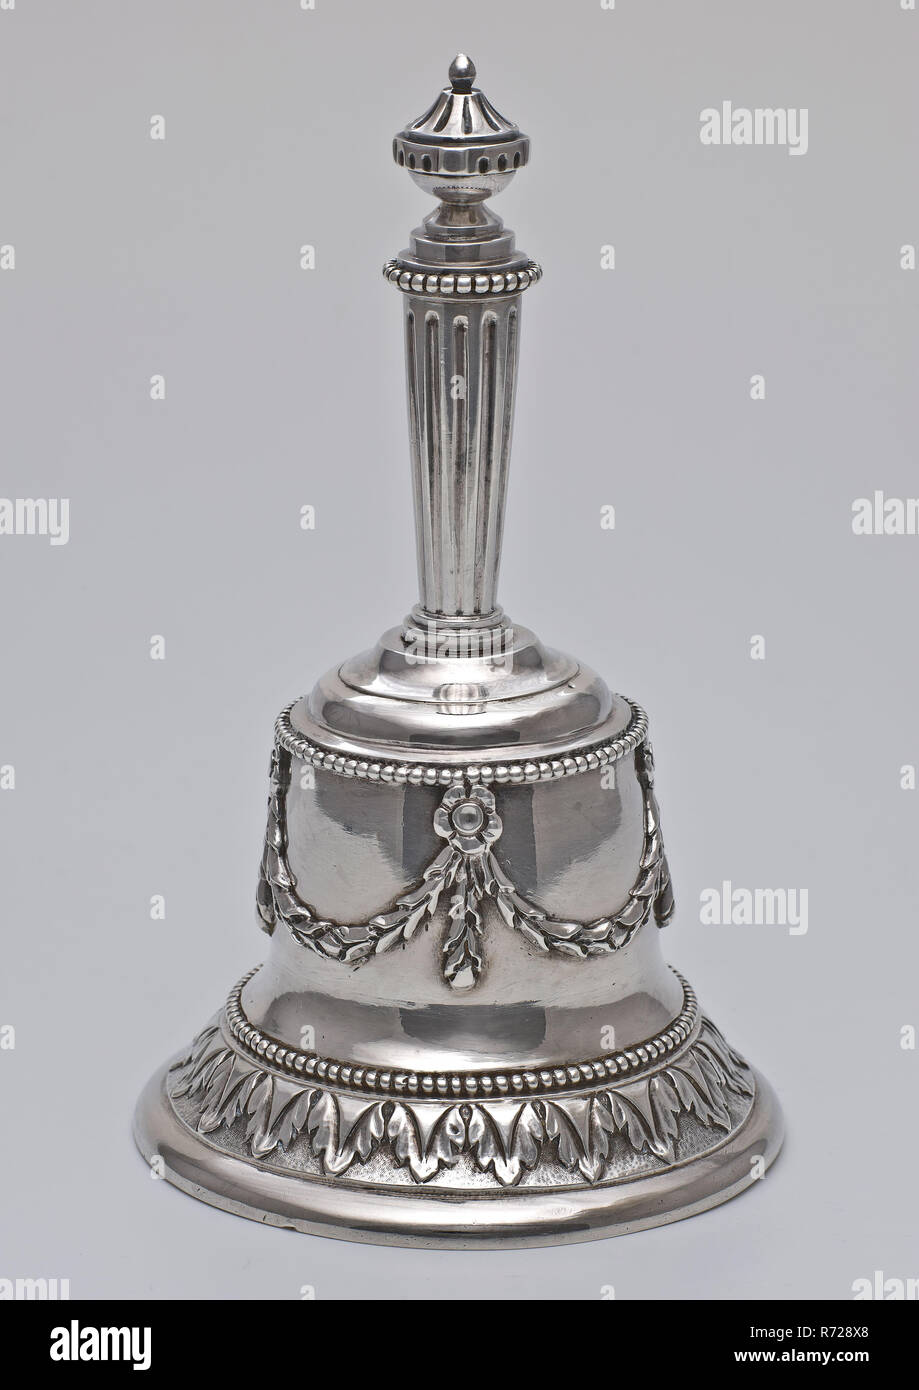 Silversmith: Johannes La Blanc, Bell-shaped, silver bell with